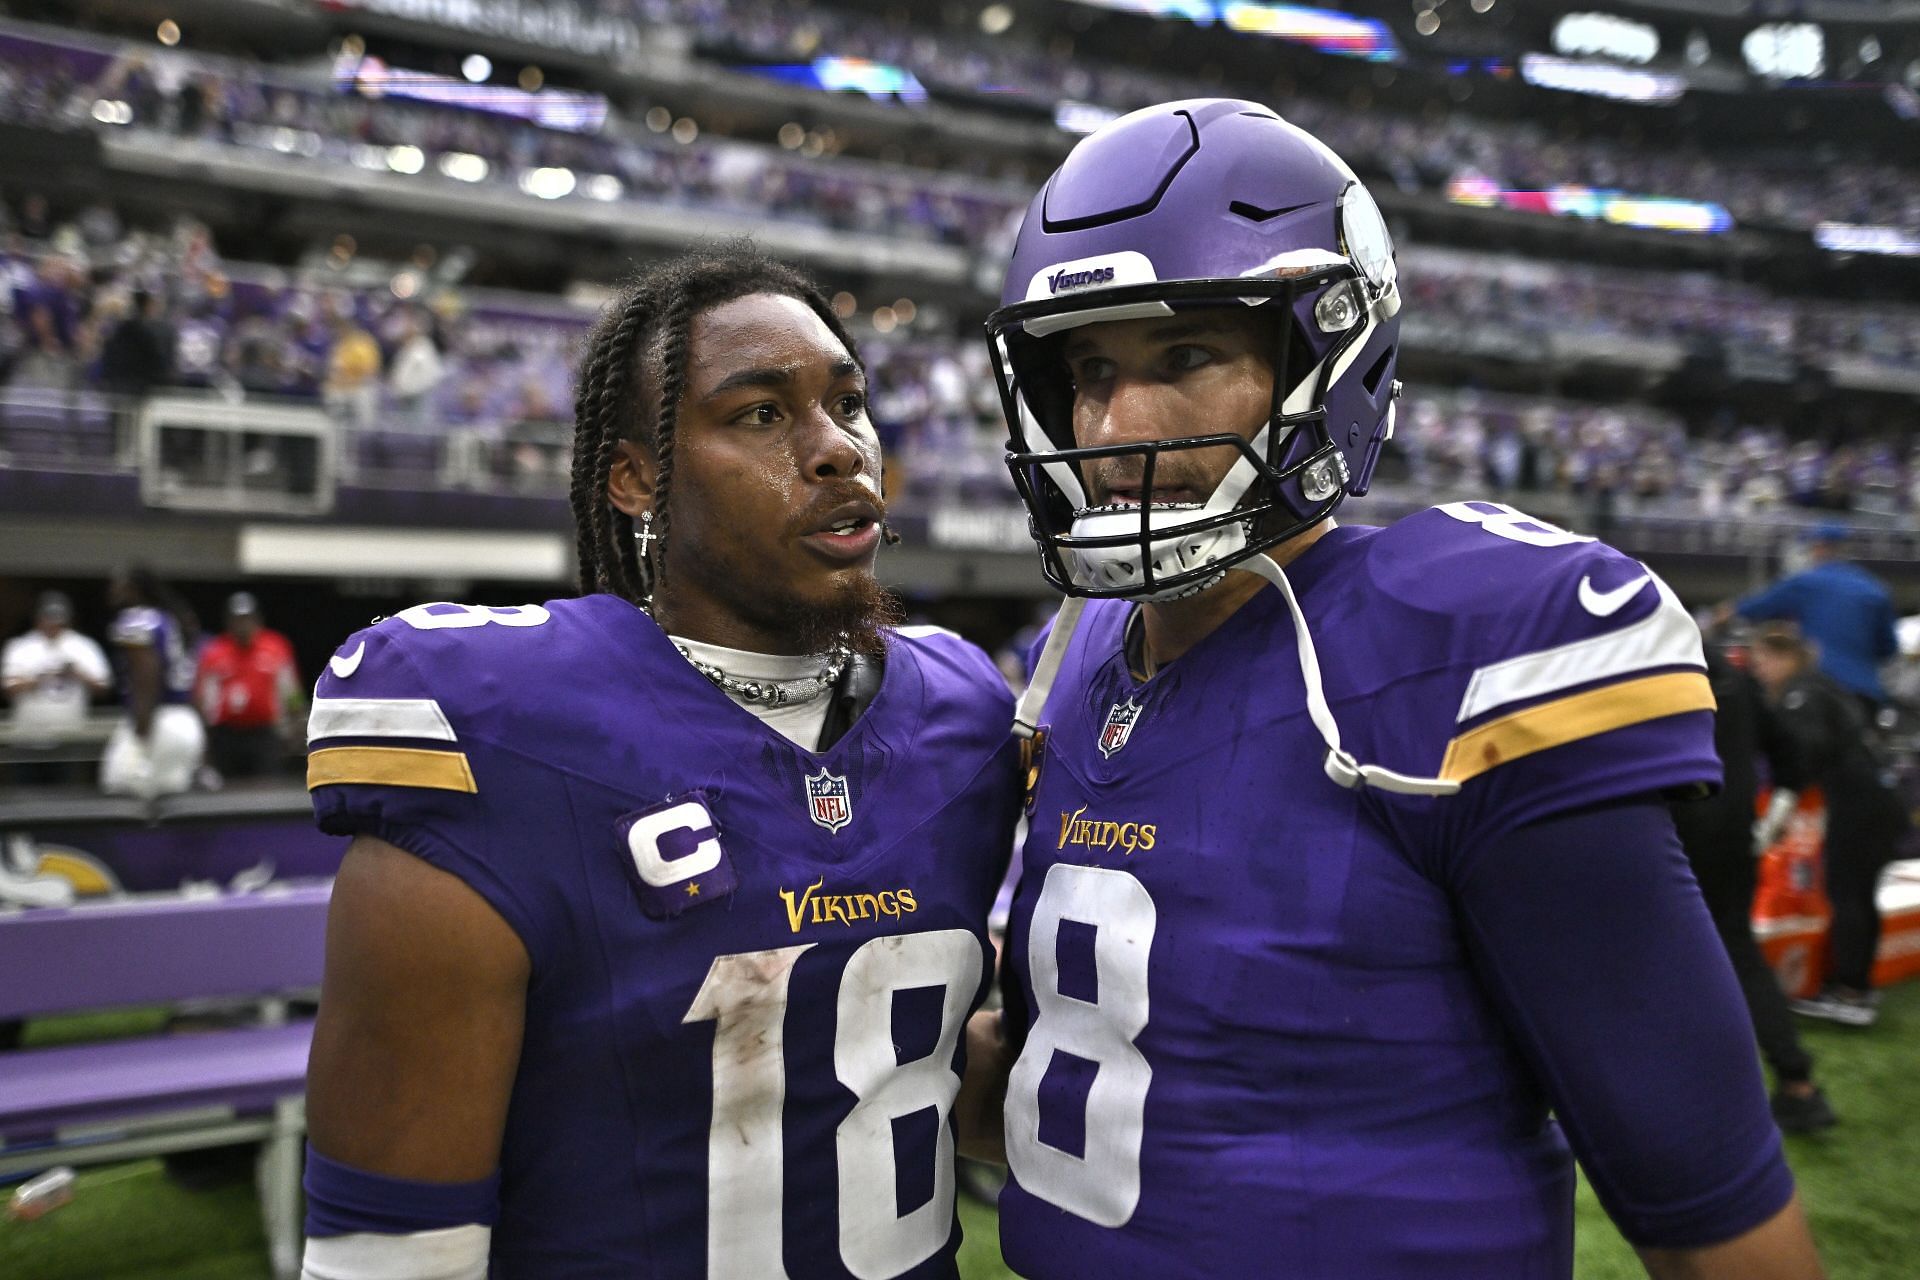 Justin Jefferson not entertaining trade talks around Kirk Cousins, other  Vikings players after 0-3 start - 'I'm tired of people saying that”